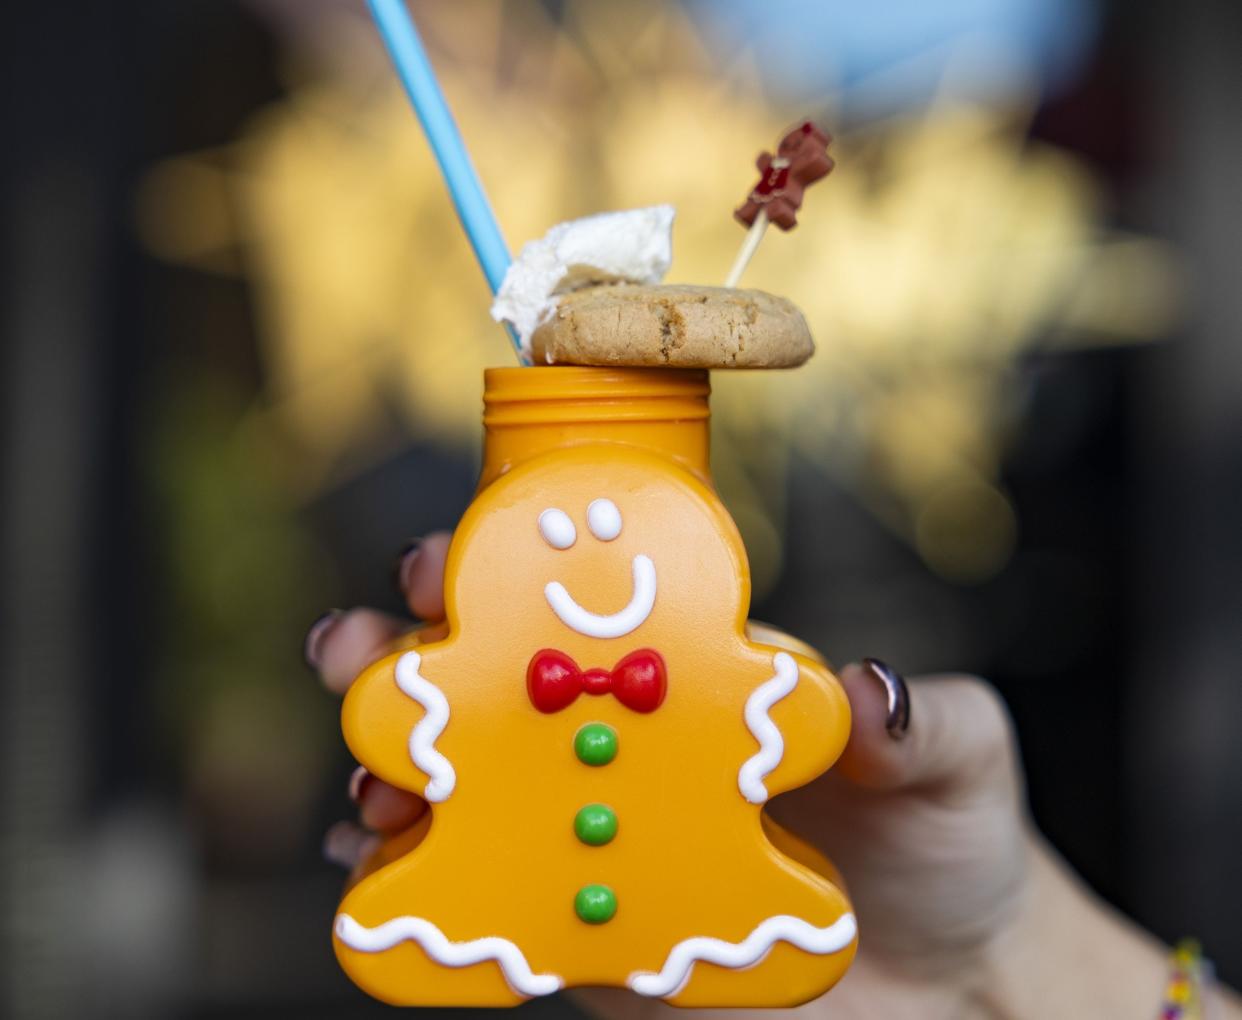 This creamy, gingersnap-topped cocktail called Gingie’s Noggin is one of Kapow Noodle Bar's specialty holiday drinks.